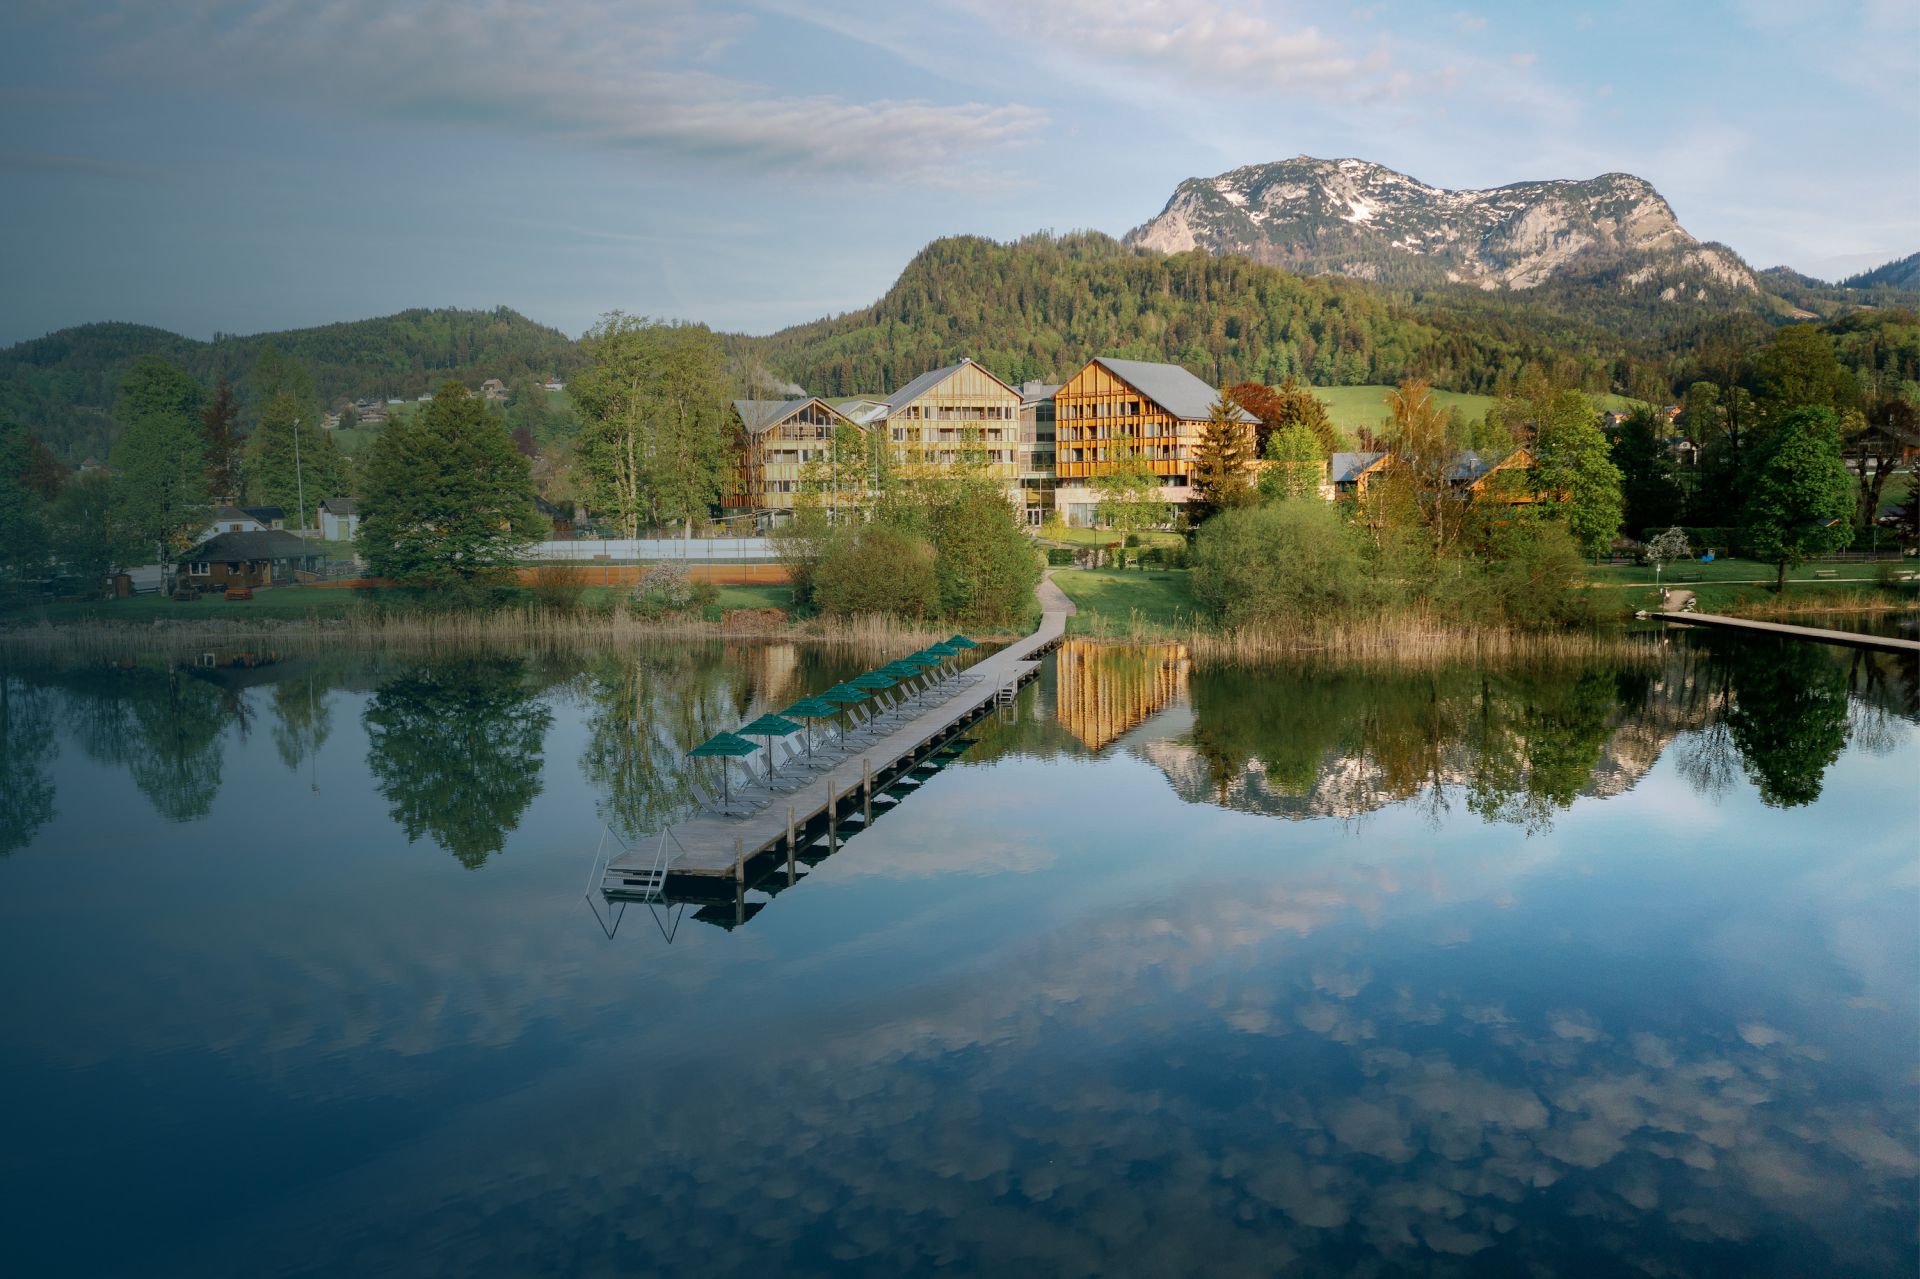 The resort is located directly on Lake Altaussee in Styria